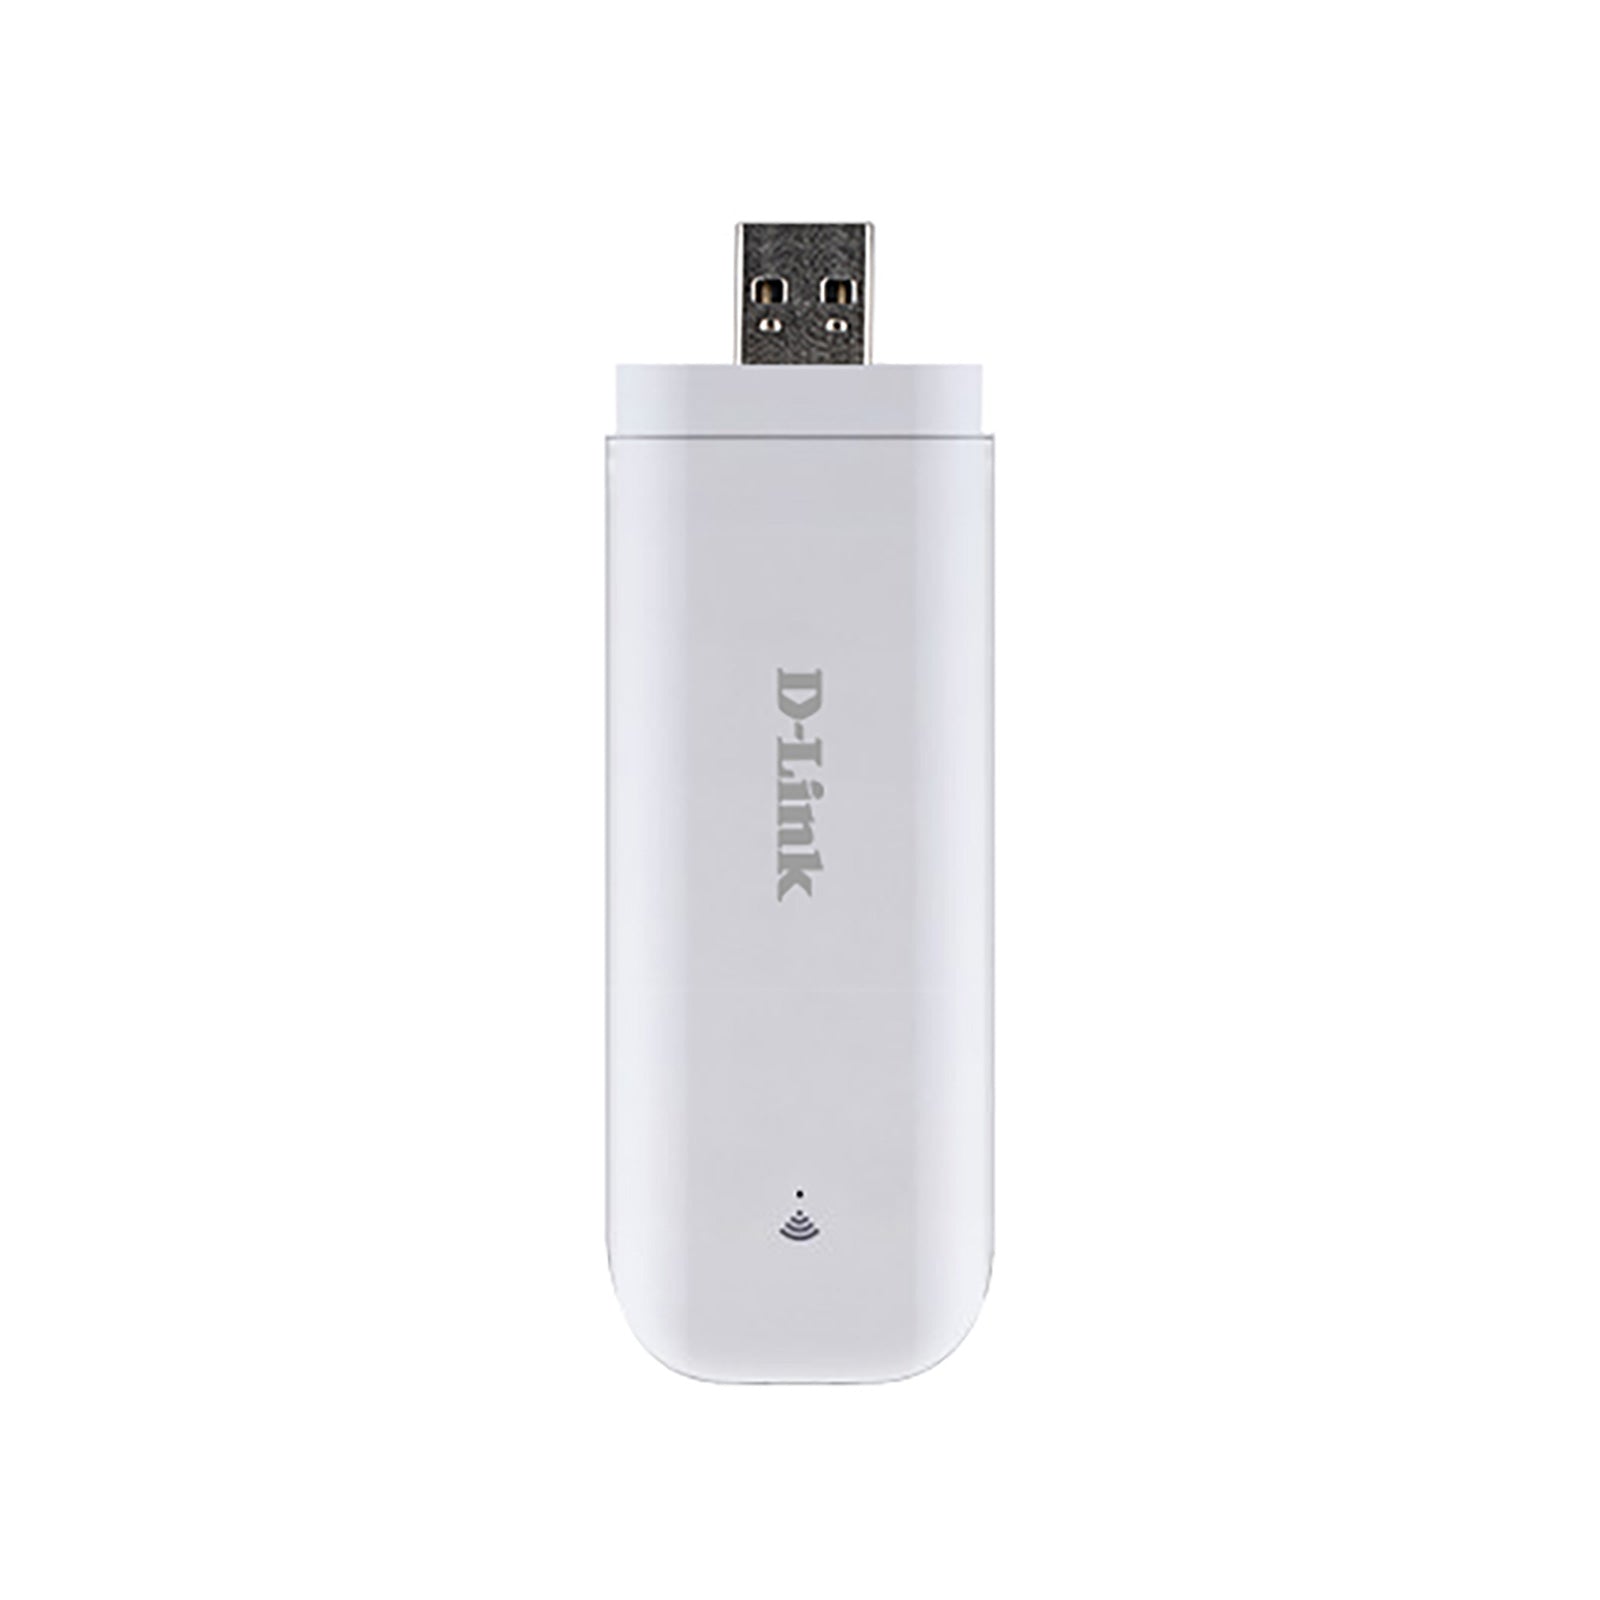 græsplæne Blossom Byen D-LINK 4G LTE USB ADAPTER - UP TO 150 MBPS DOWNLINK AND 50 MBPS UPLINK -  WIRELESS 802.11B/G/N TO CREATE A WIRELESS HOTSPOT – Vice-Tech